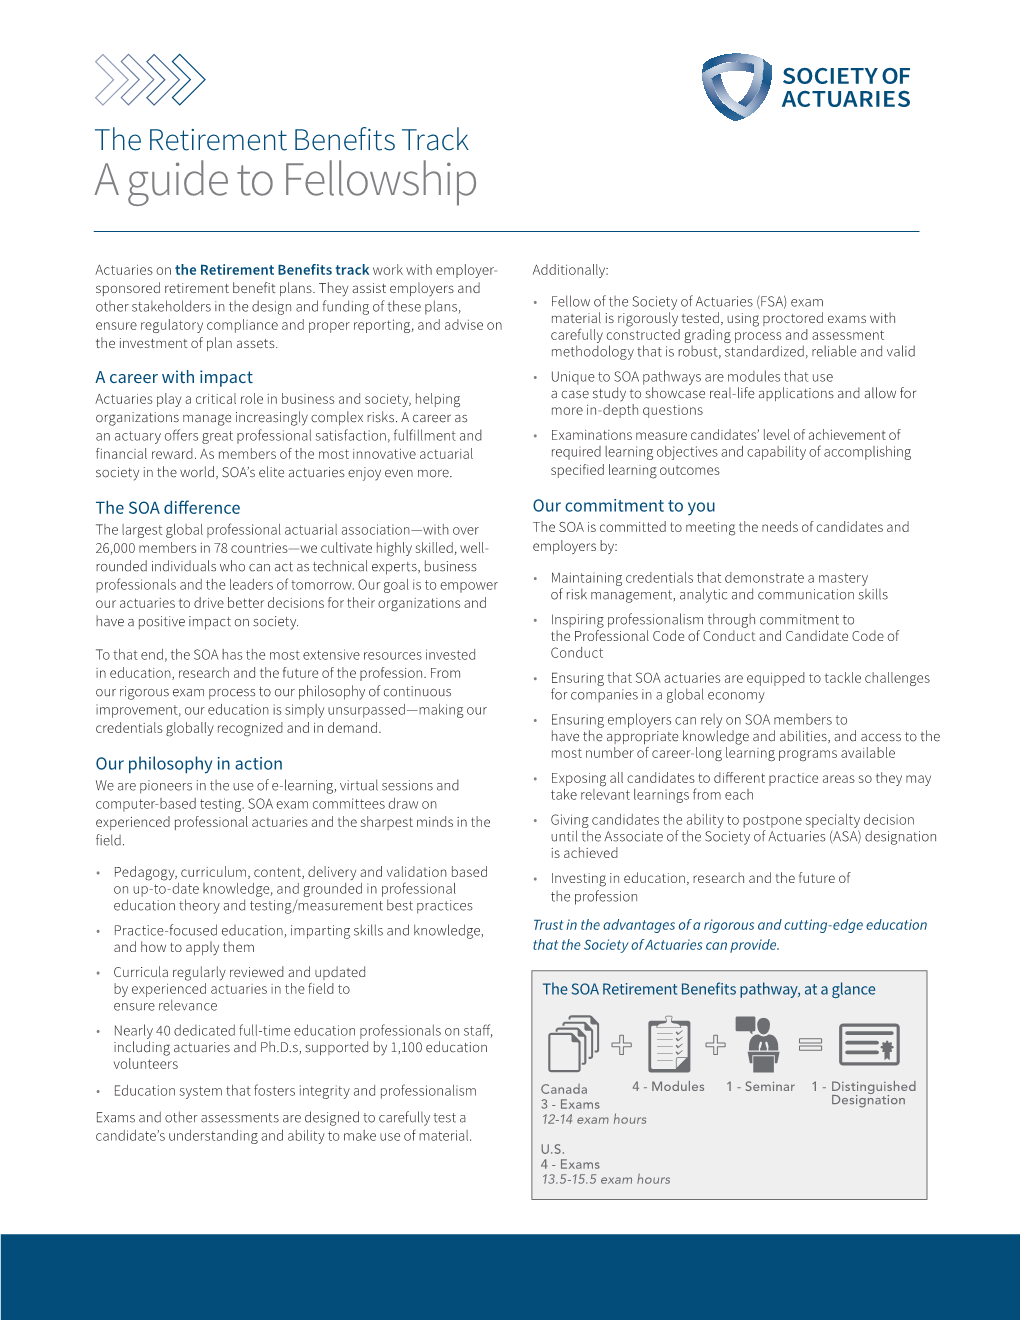 The Retirement Benefits Track a Guide to Fellowship